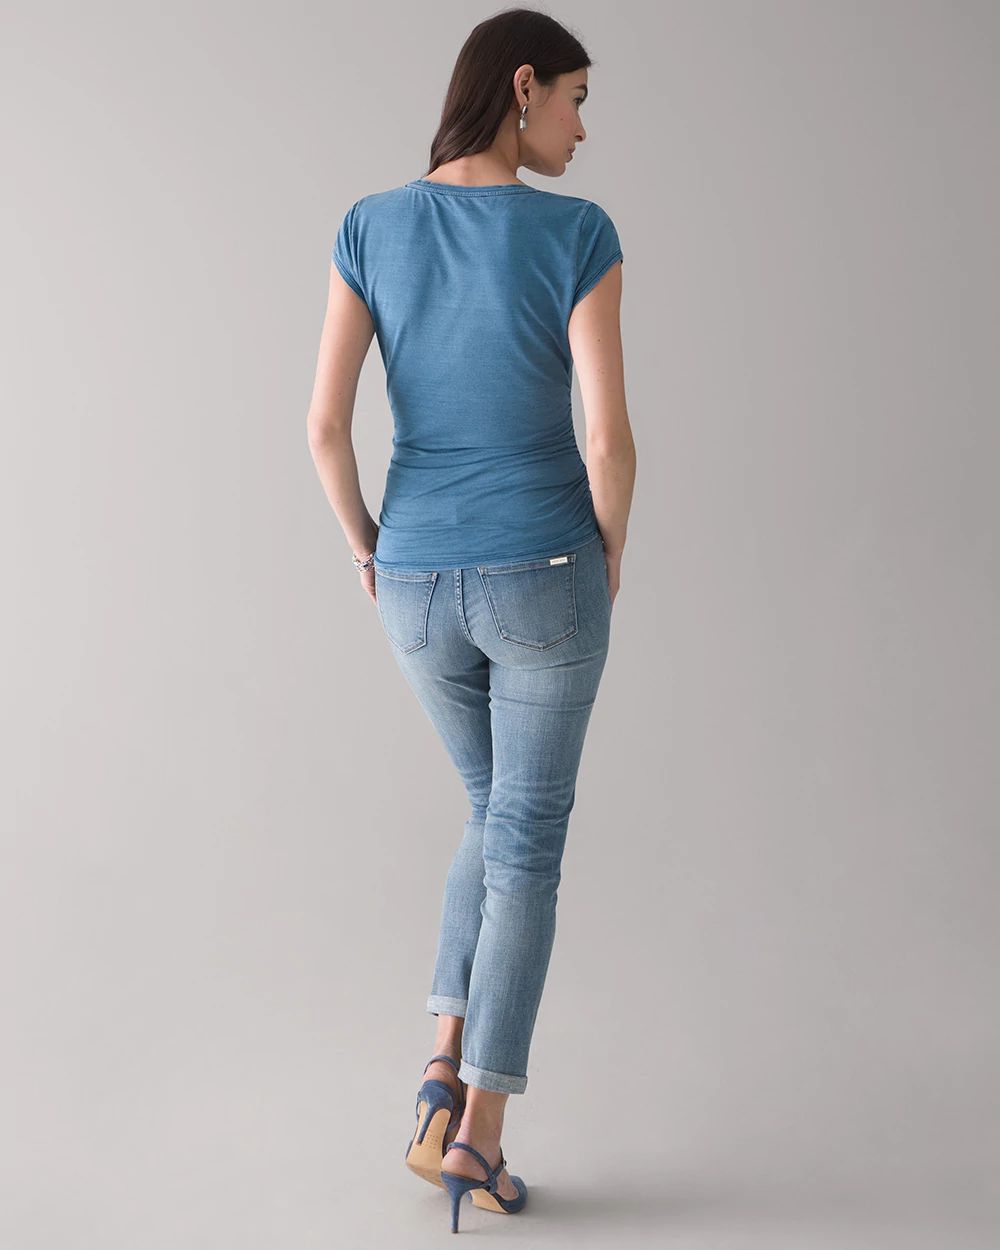 Ruched Cap Sleeve Tee click to view larger image.